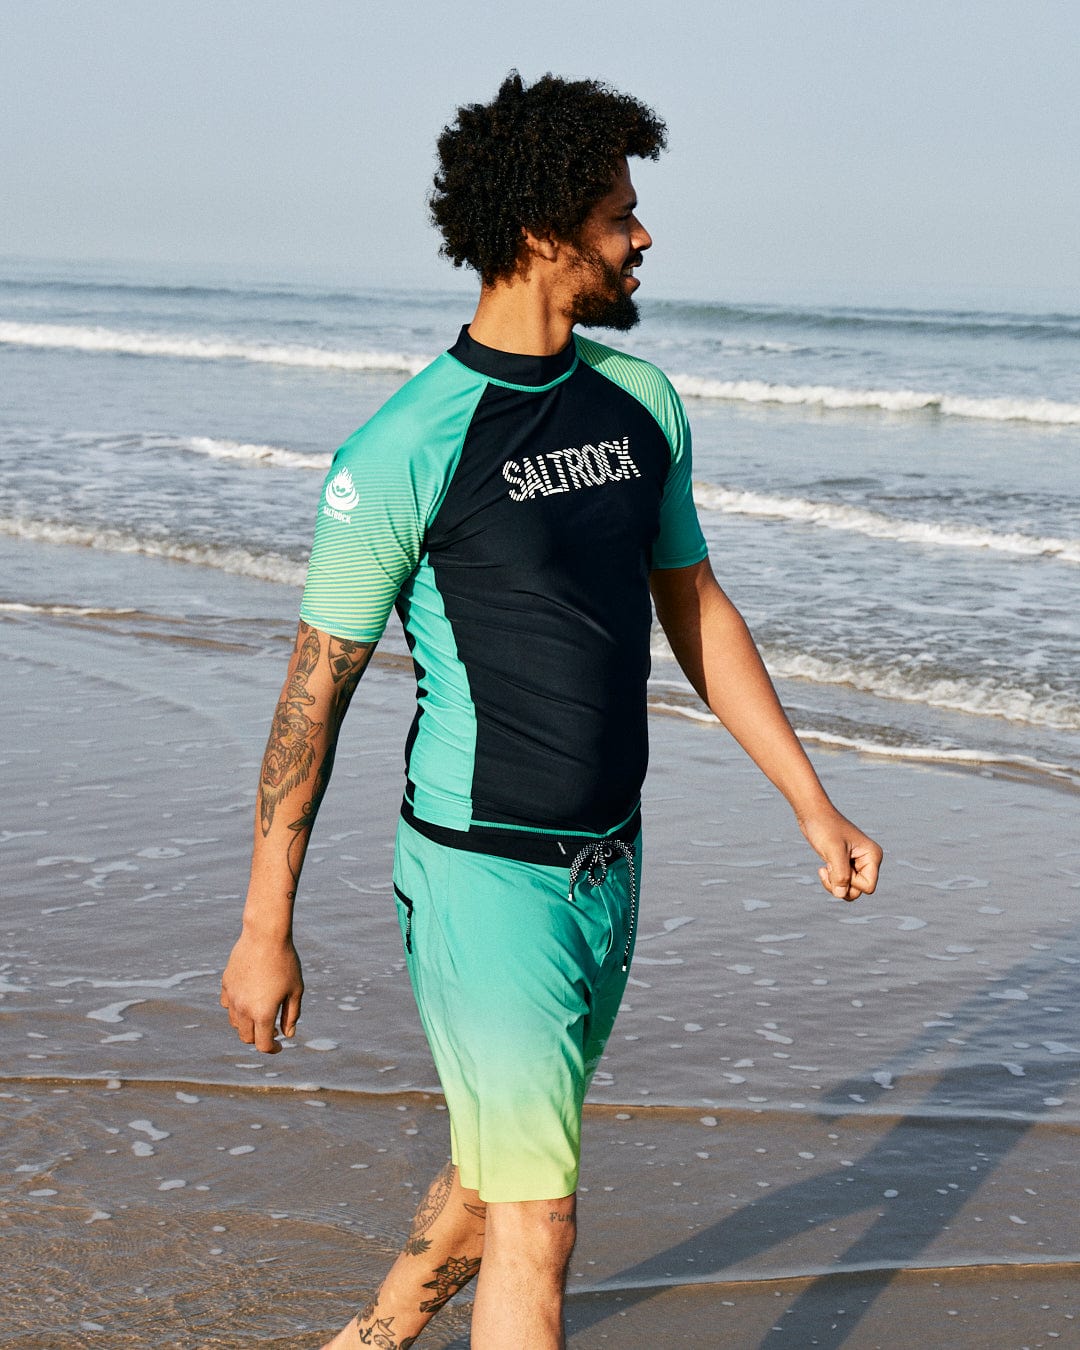 A man with curly hair wearing a rash guard and Saltrock Geo Palms Men's Boardshorts in Green, made from Repreve recycled material, walking on the beach and looking to the side.